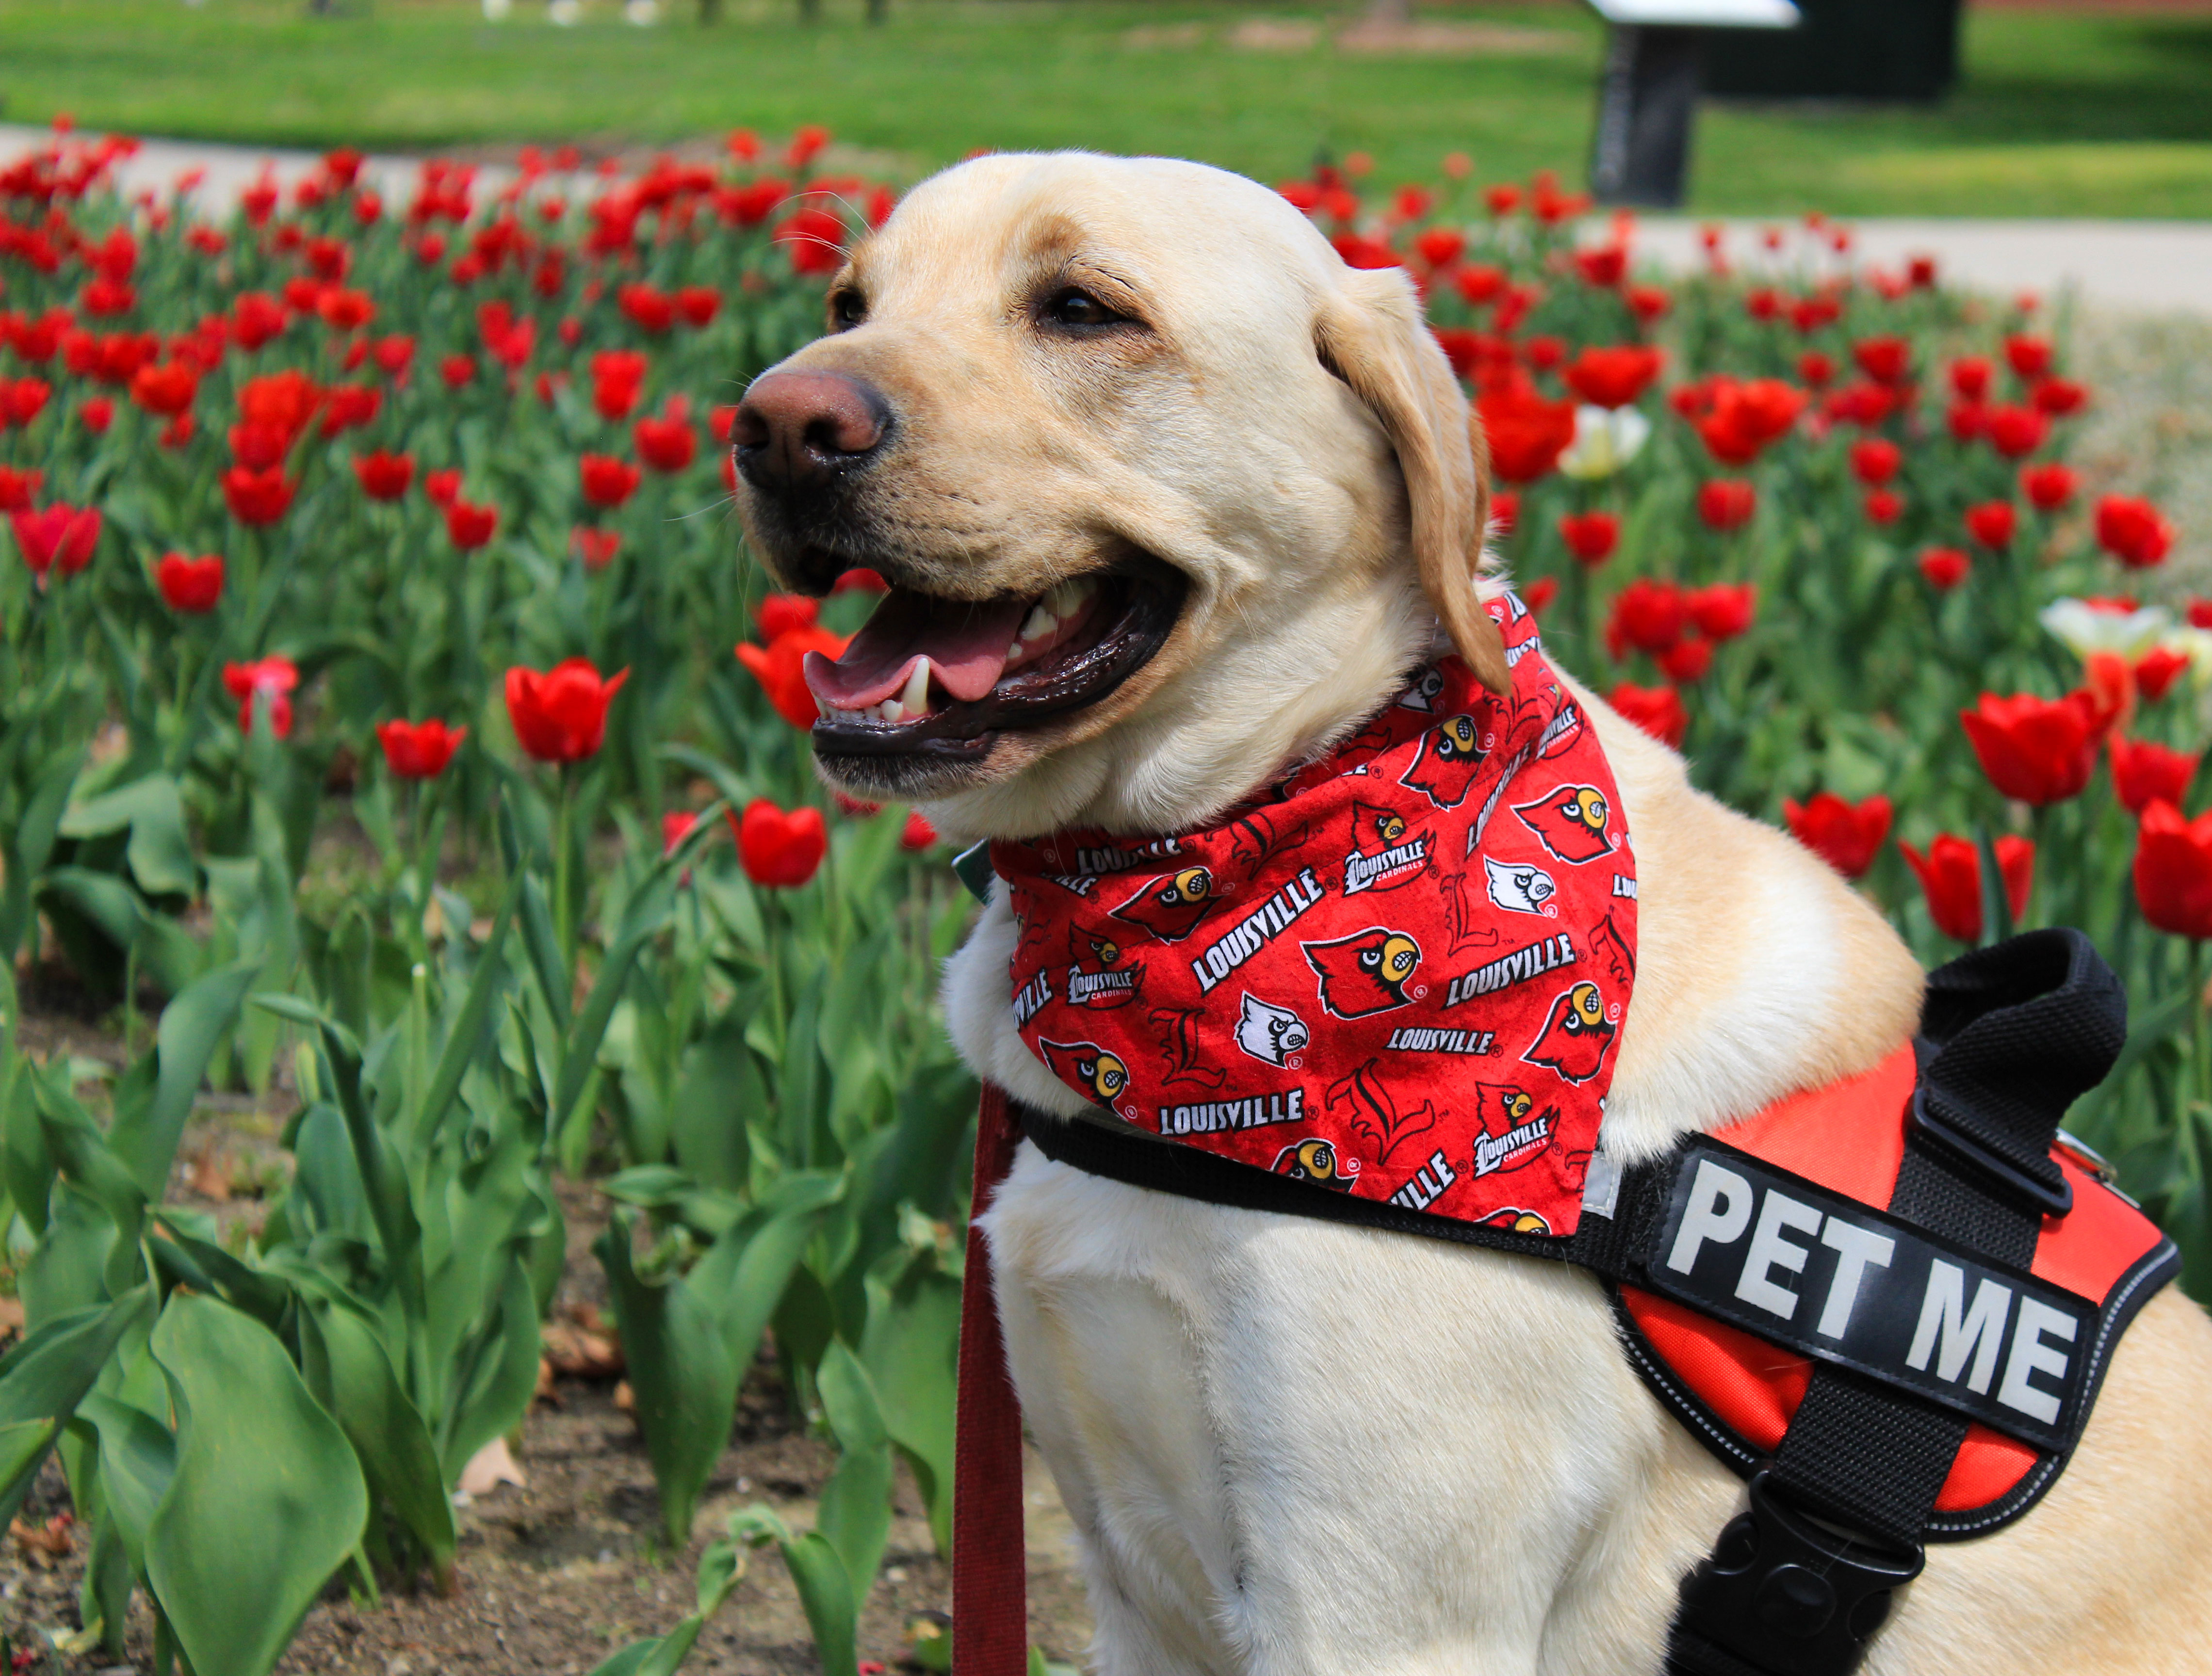 Therapy dog sitting in front of tulips